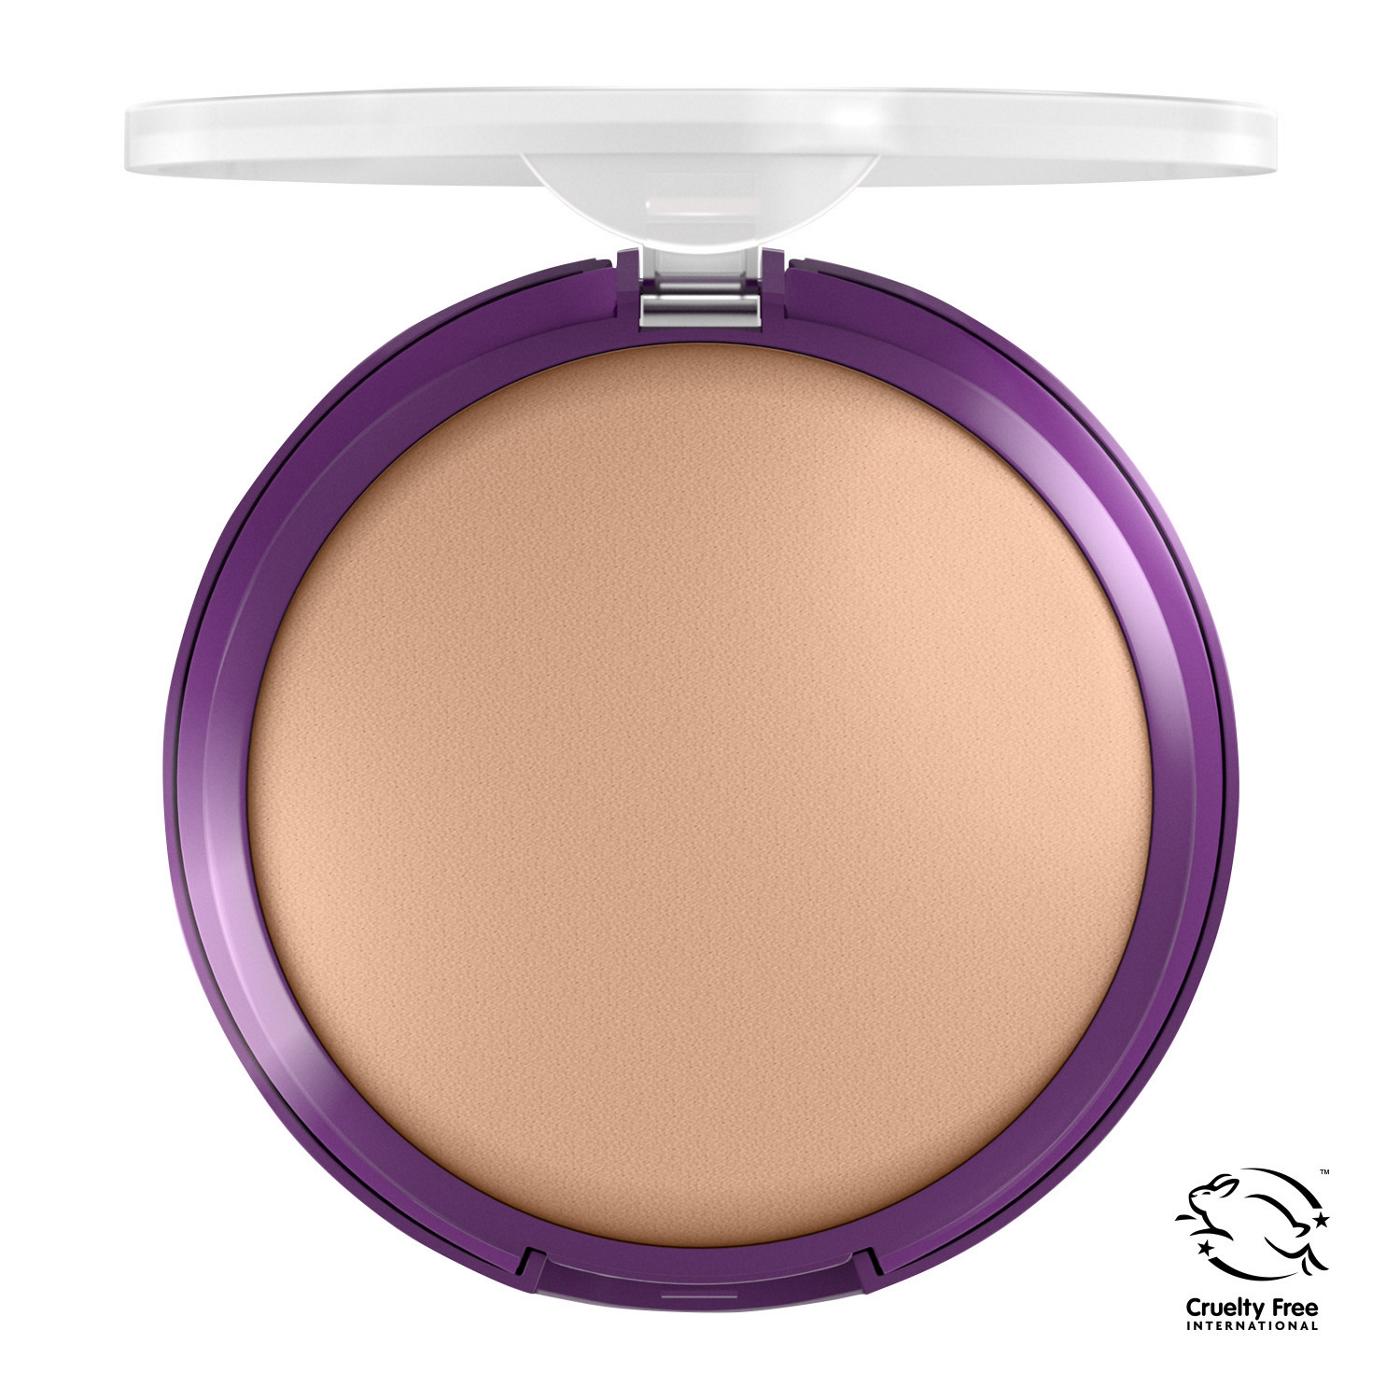 Covergirl Simply Ageless Pressed Powder 210 Classic Ivory; image 5 of 10